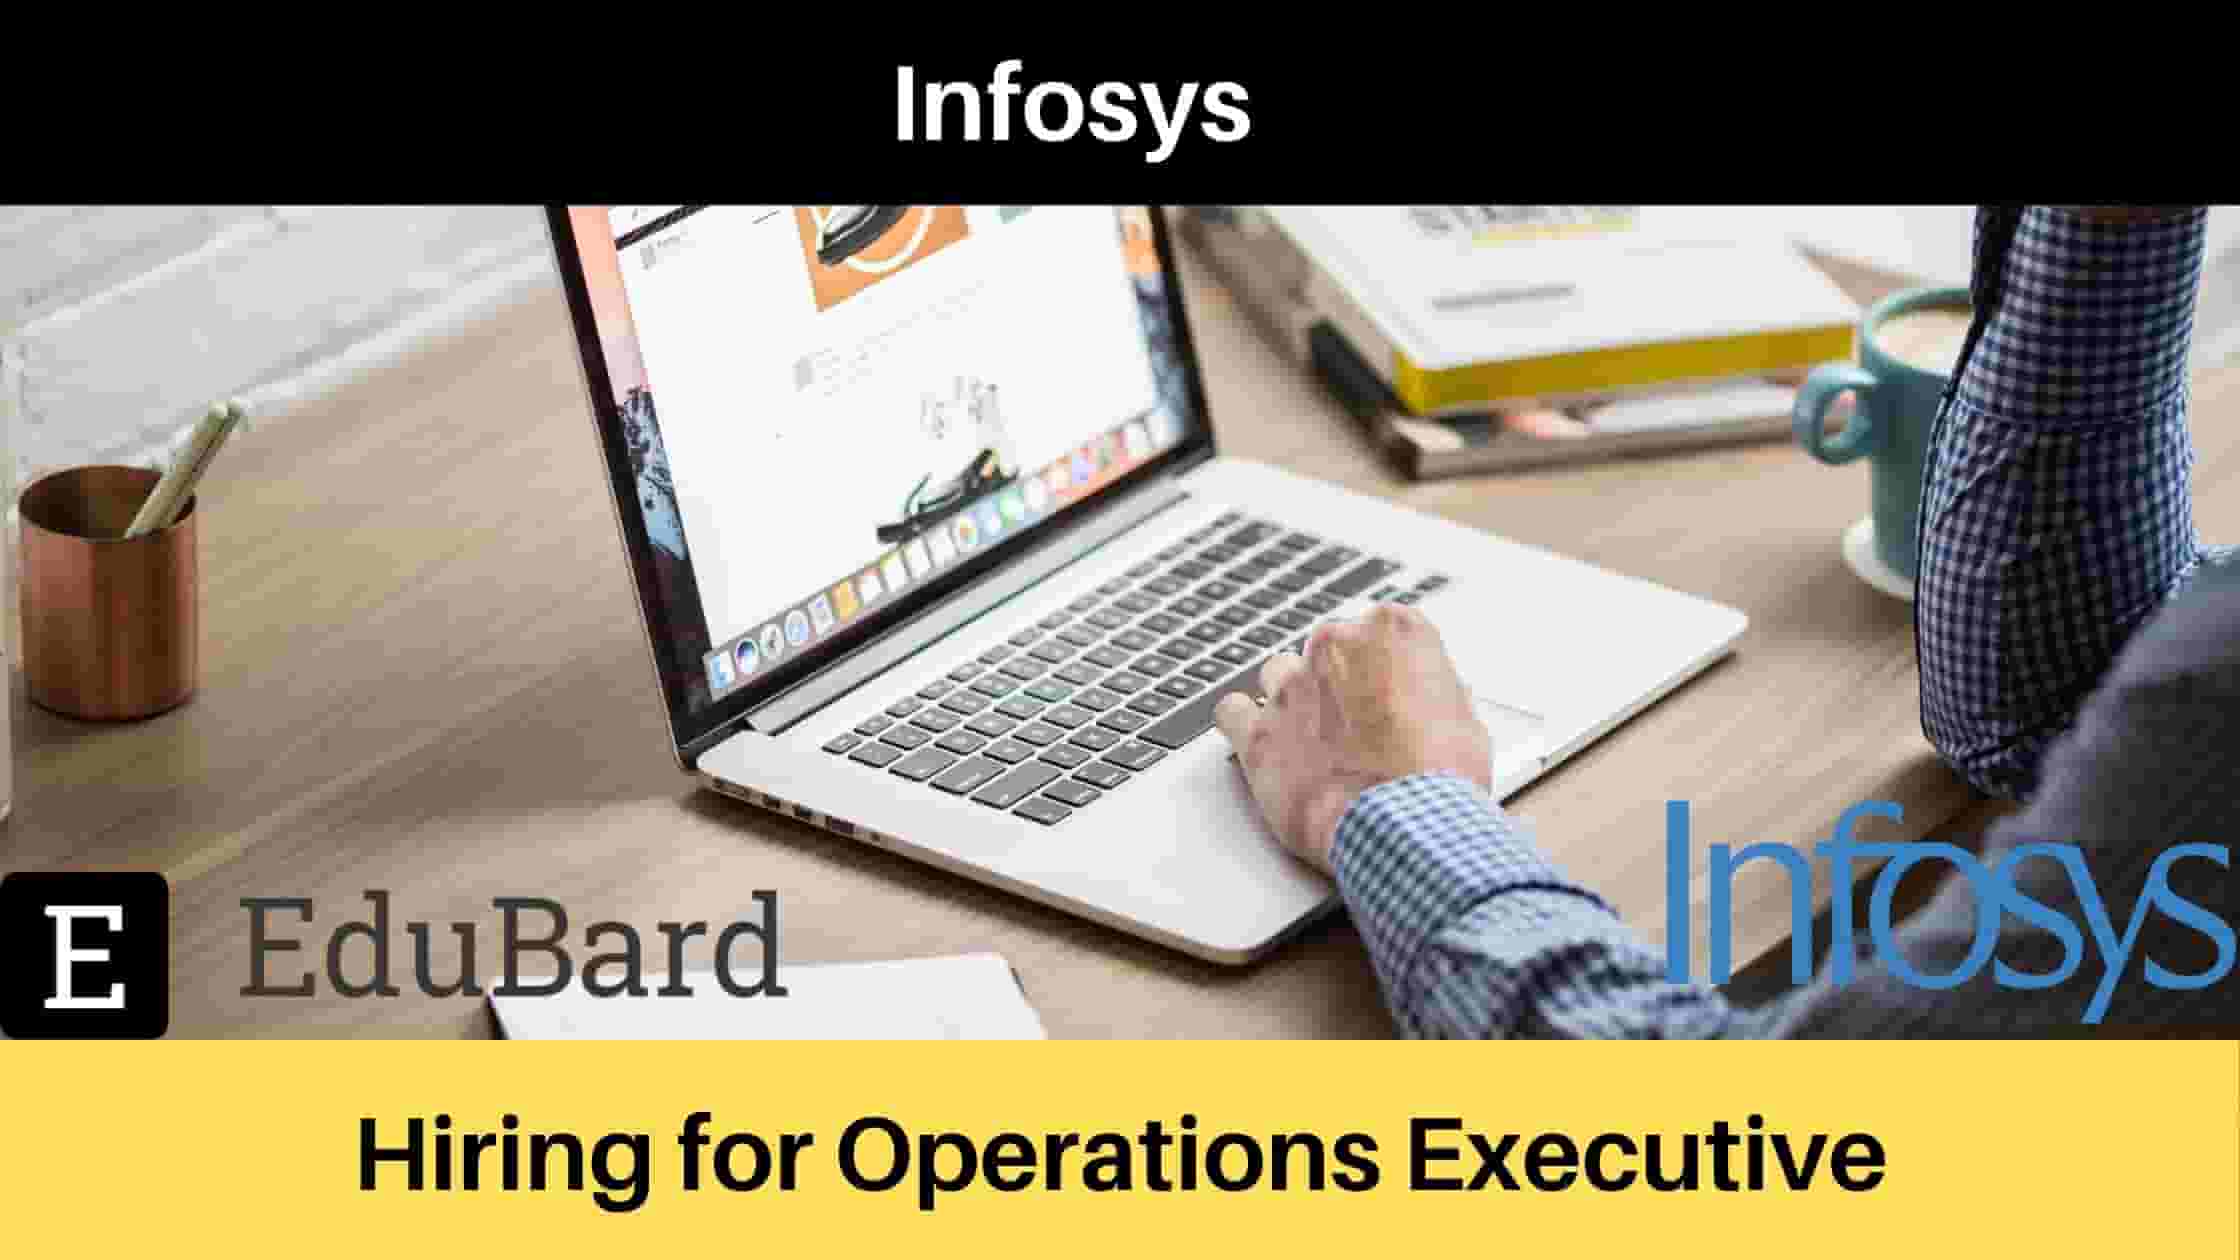 Infosys is Hiring for Operations Executive, Apply Now